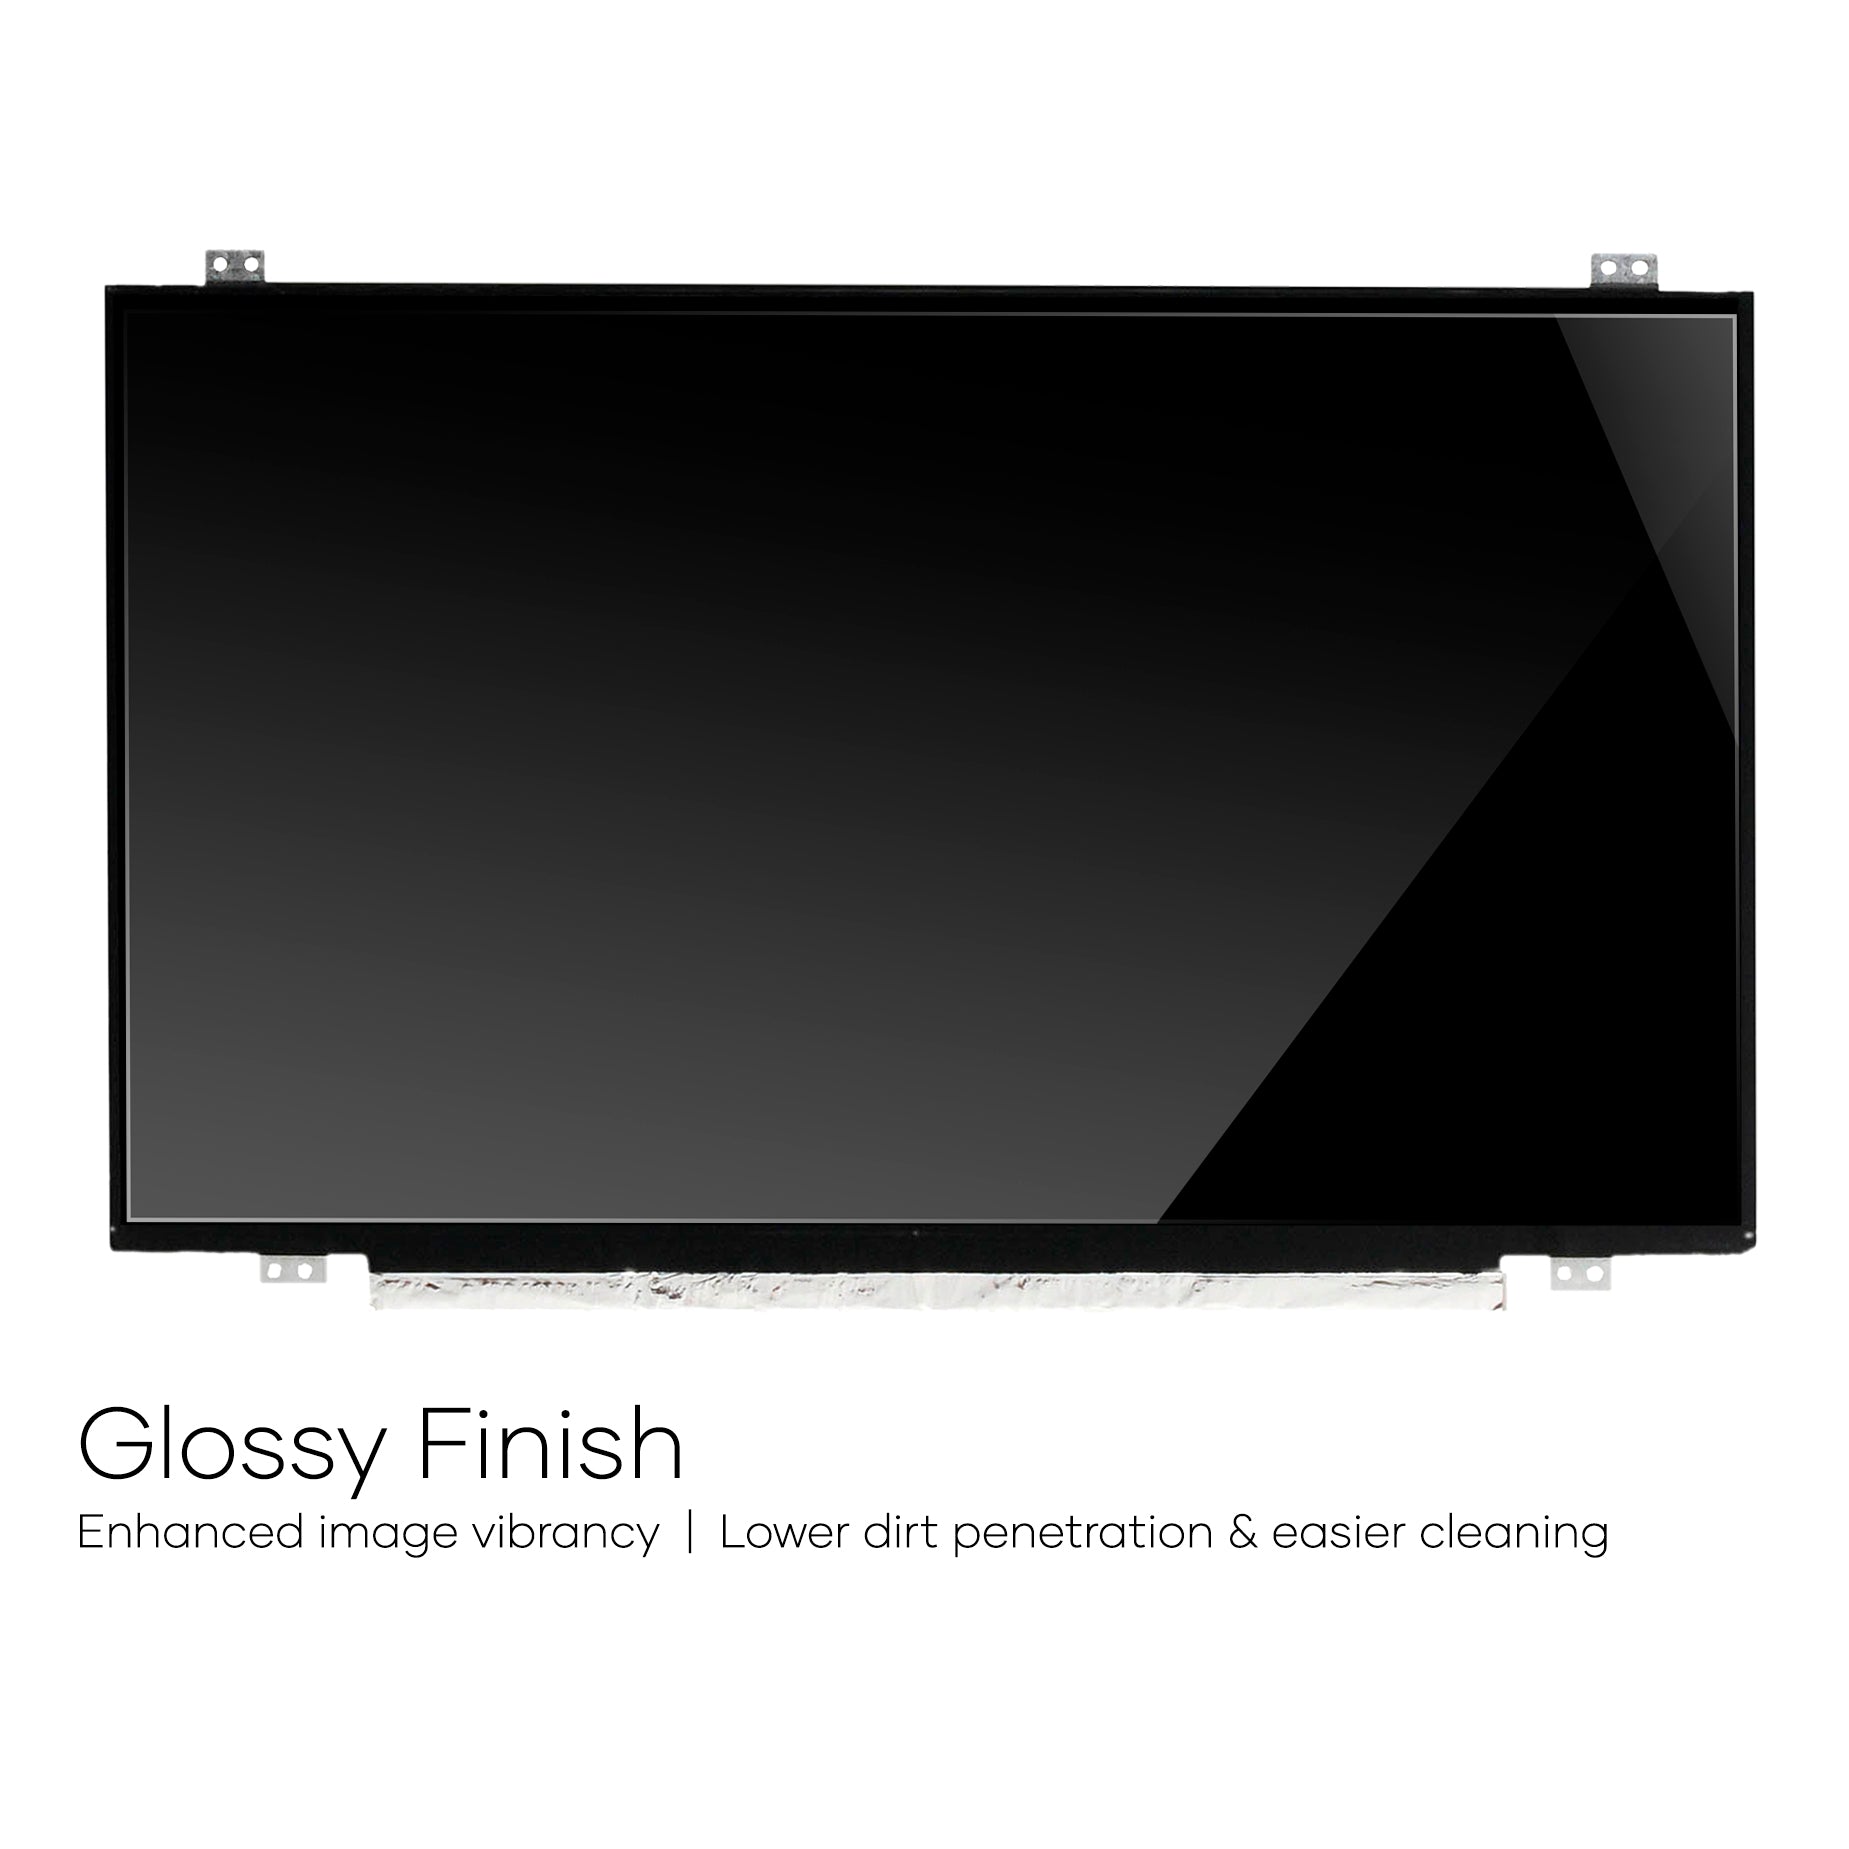 Screen Replacement for LP140WHU(TP)(D1) HD 1366x768 Glossy LCD LED Display